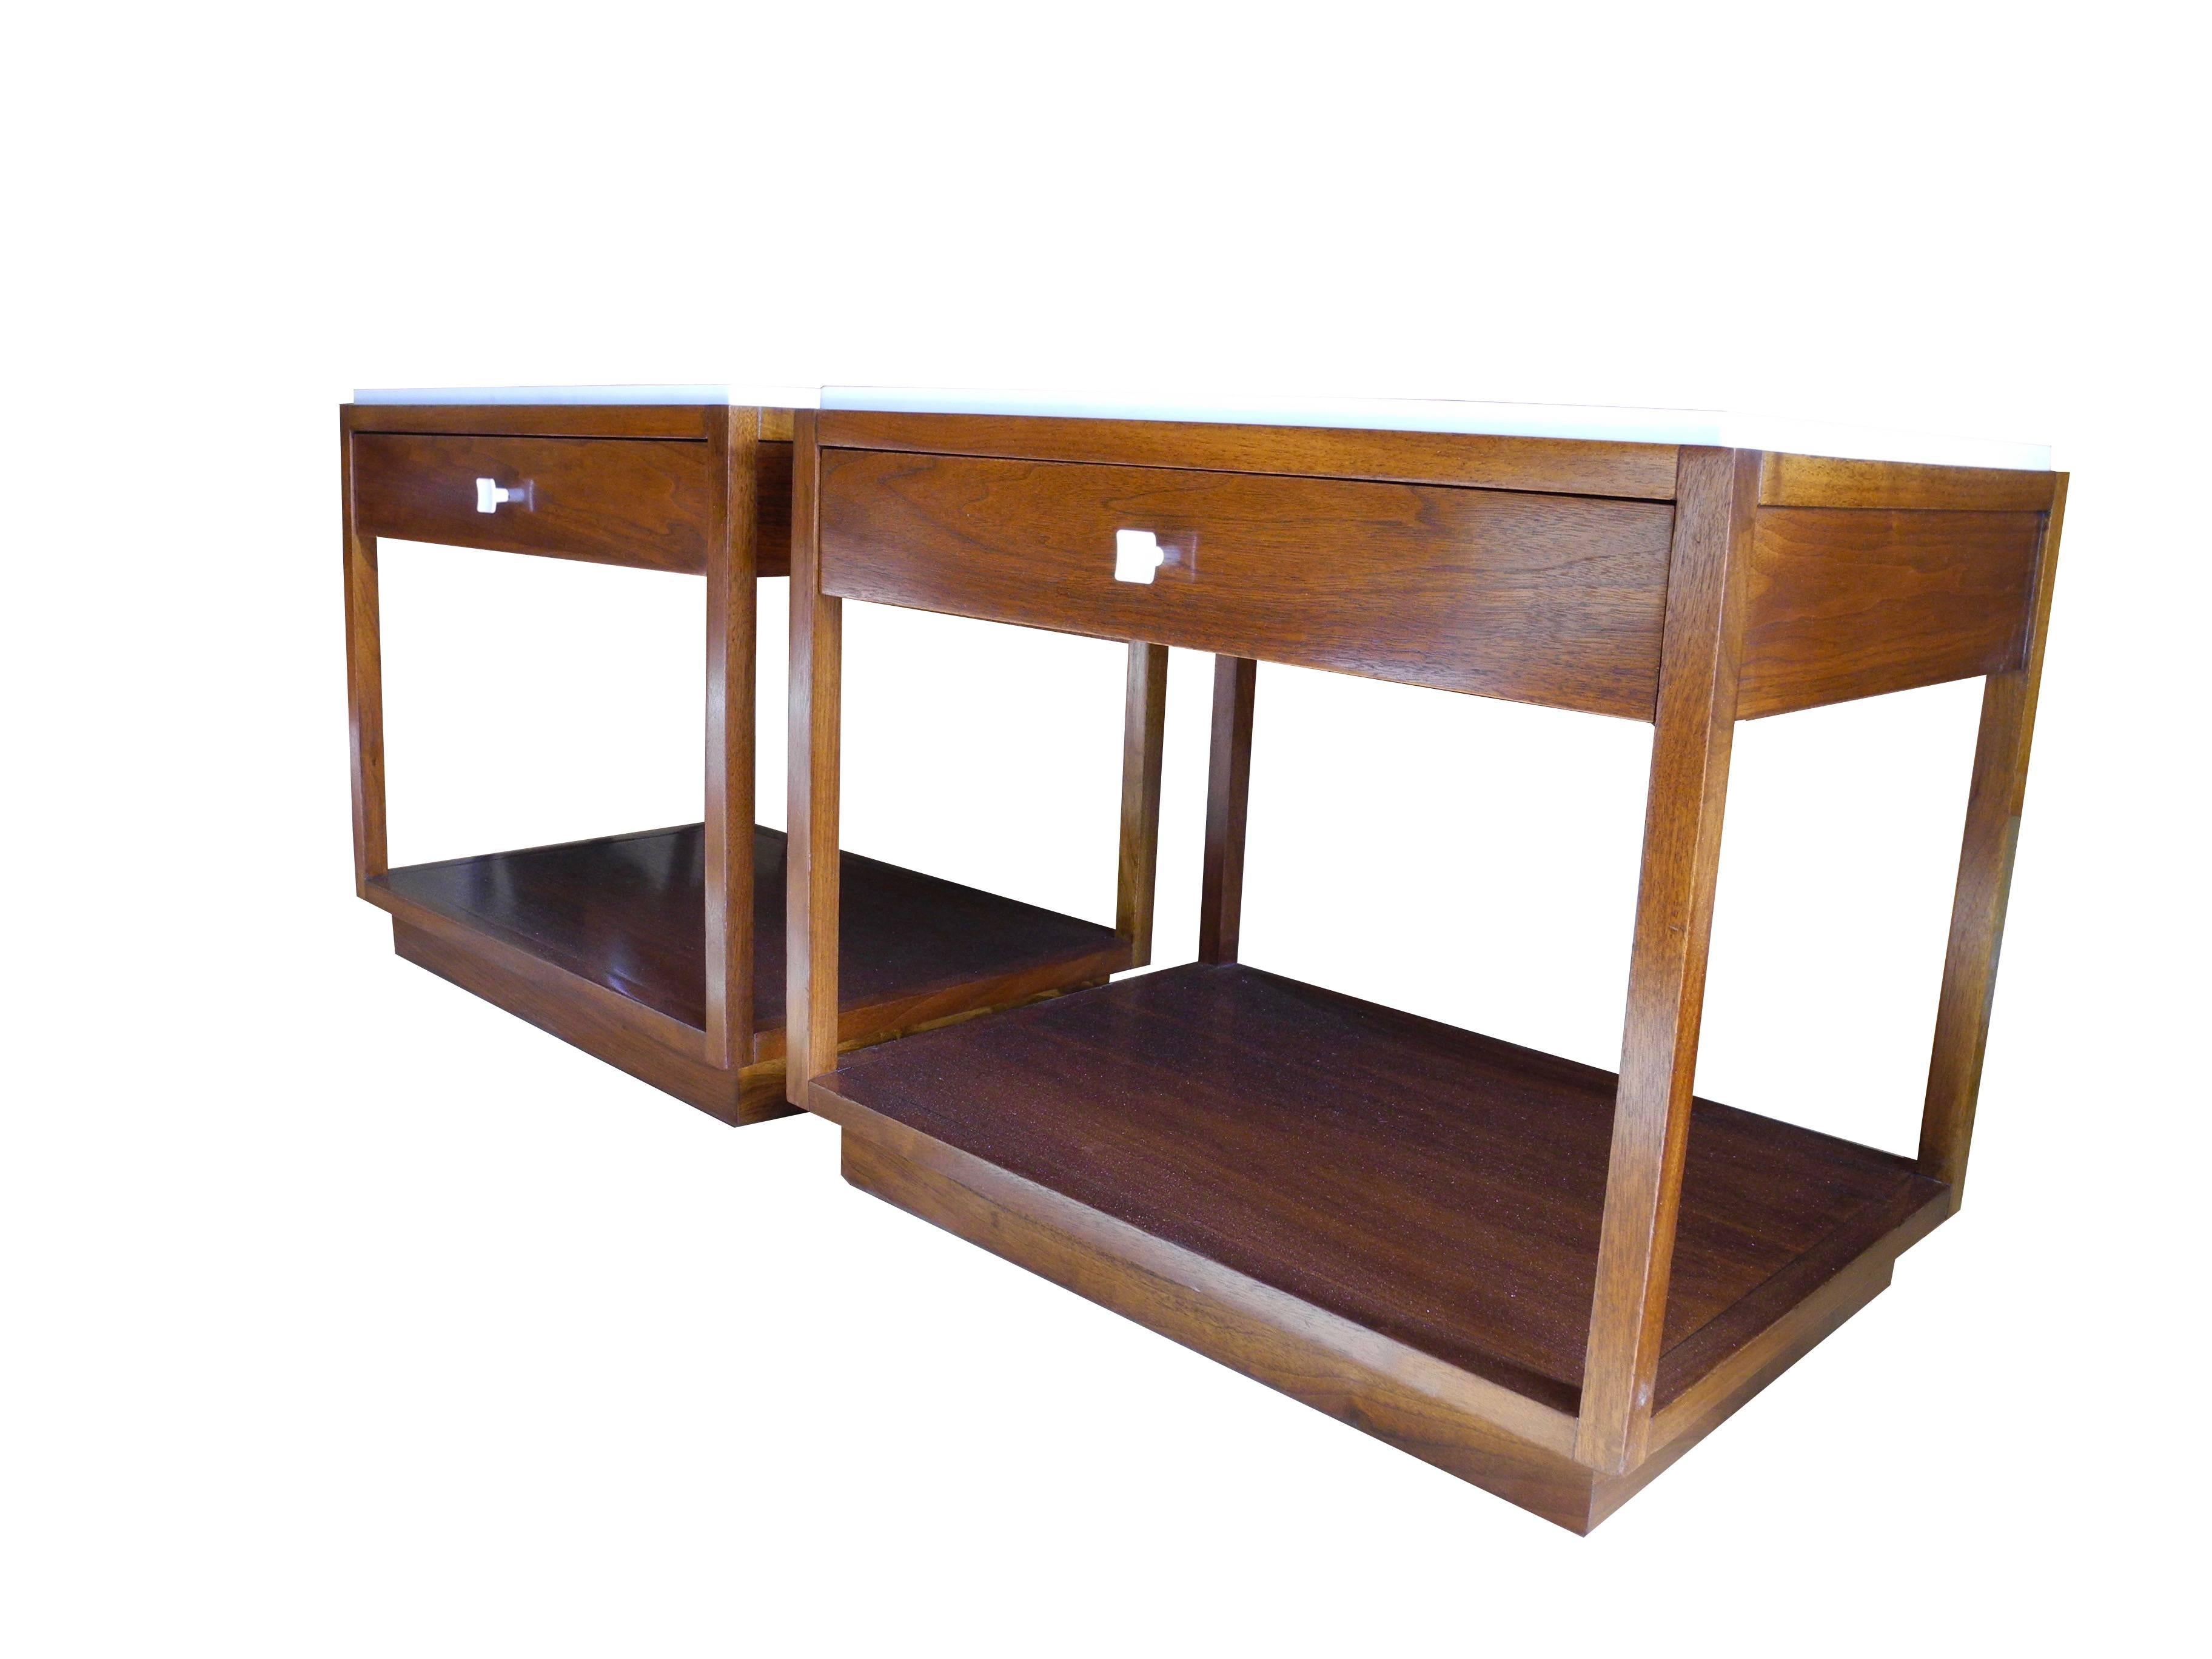 20th Century Mid-Century Modern Pair of Nightstands by Milo Baughman for Directional